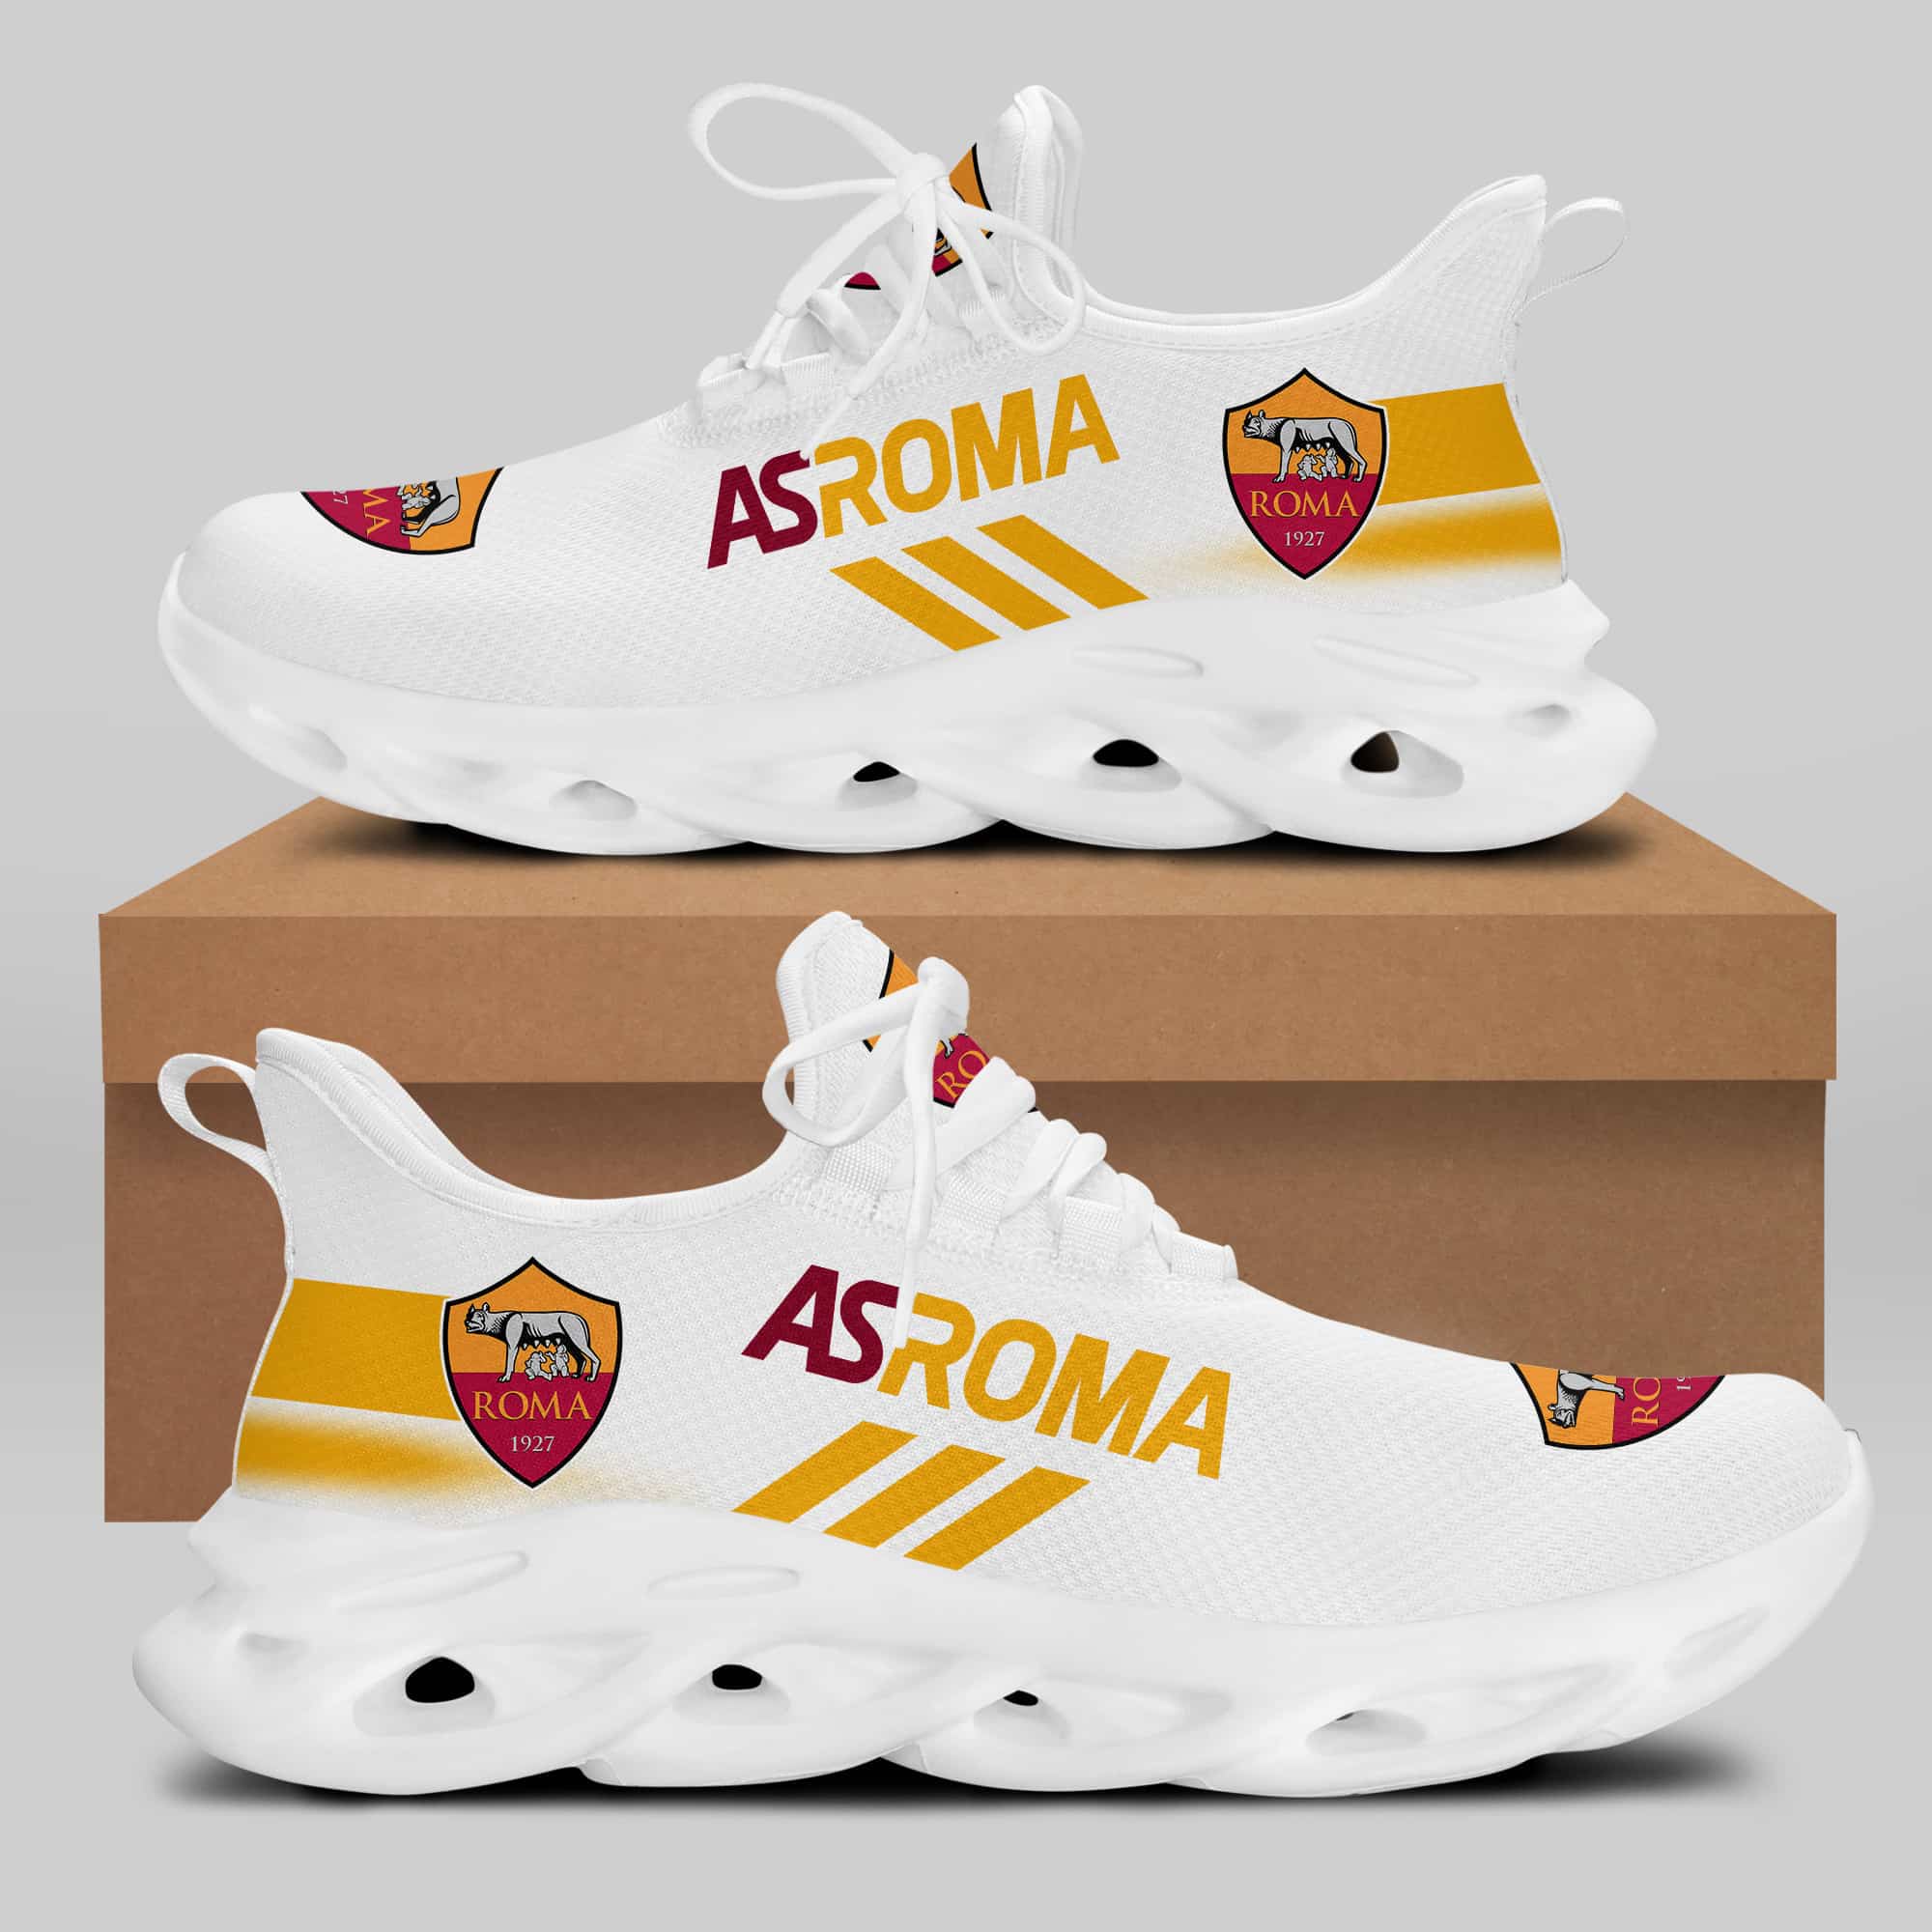 As Roma Running Shoes Max Soul Shoes Sneakers Ver 27 1